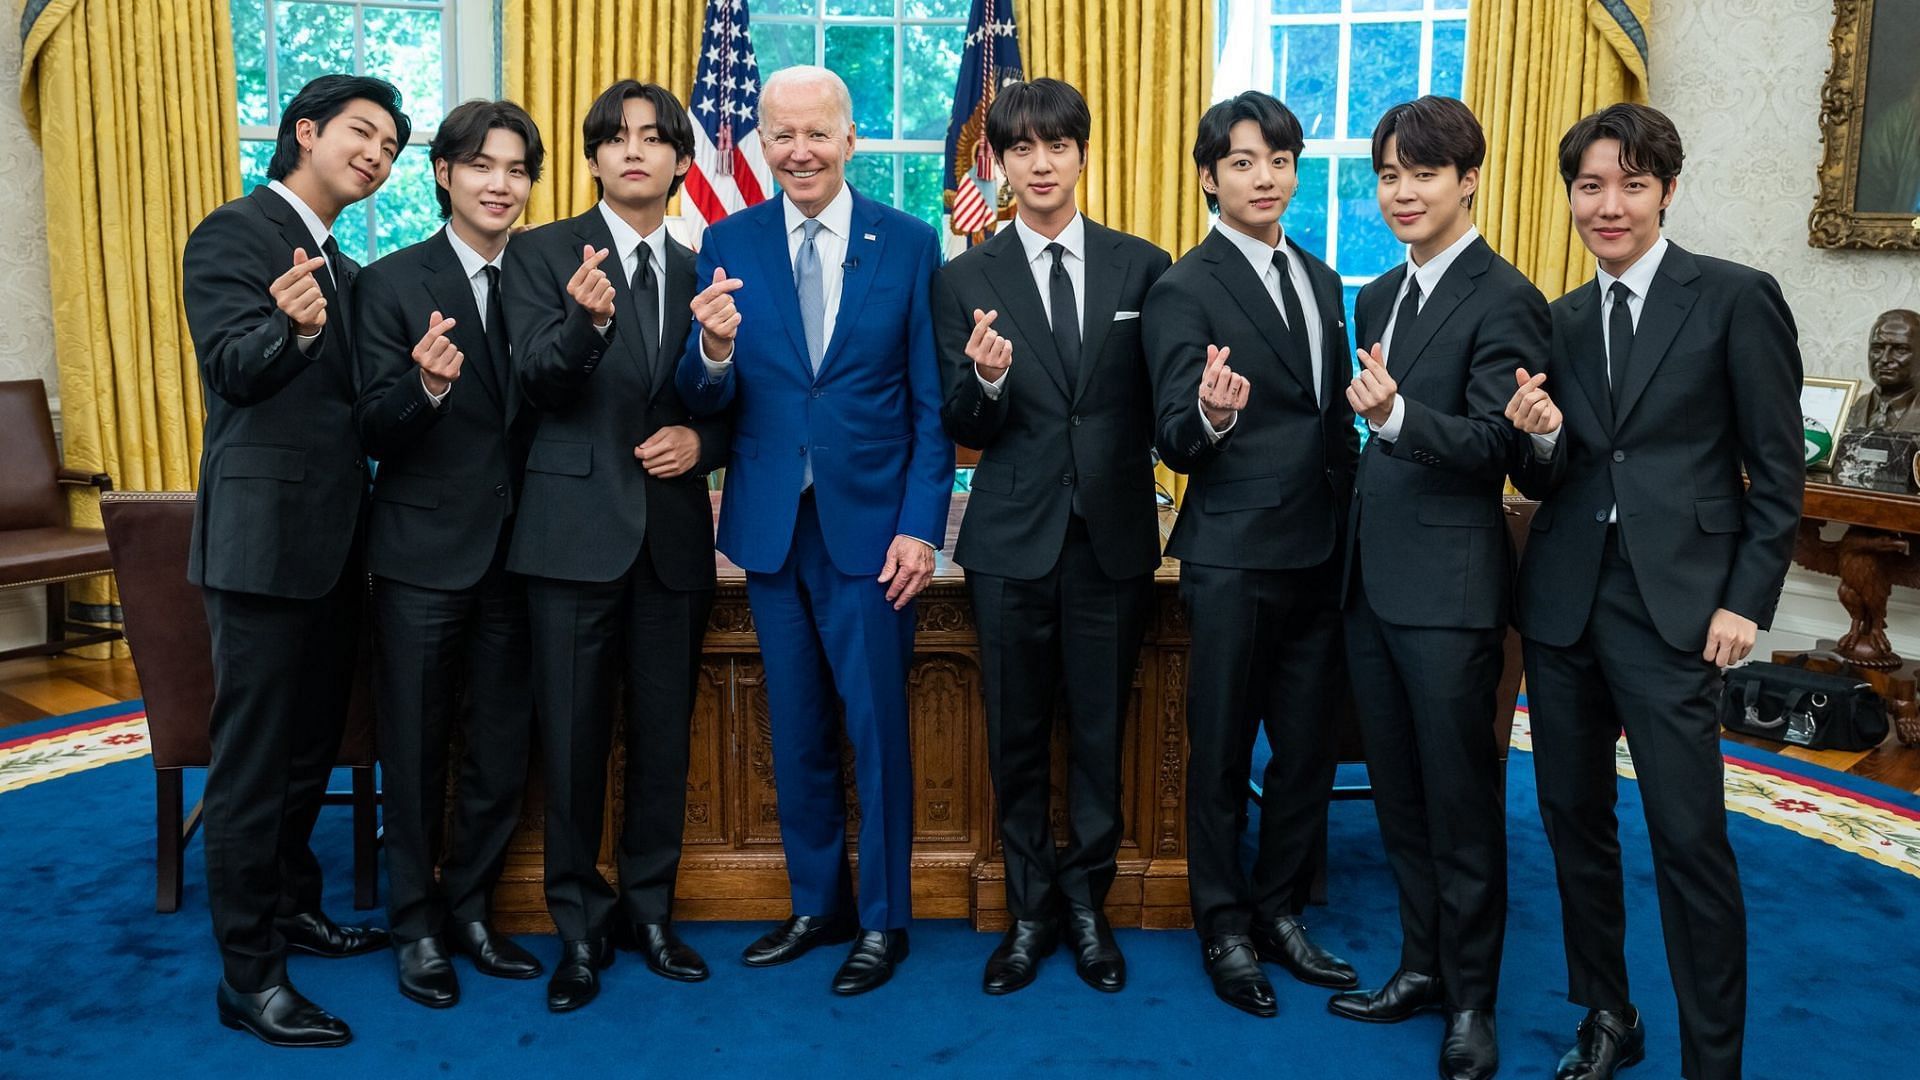 A still of the K-pop group with POTUS (Image via @bts_bighit/Twitter)